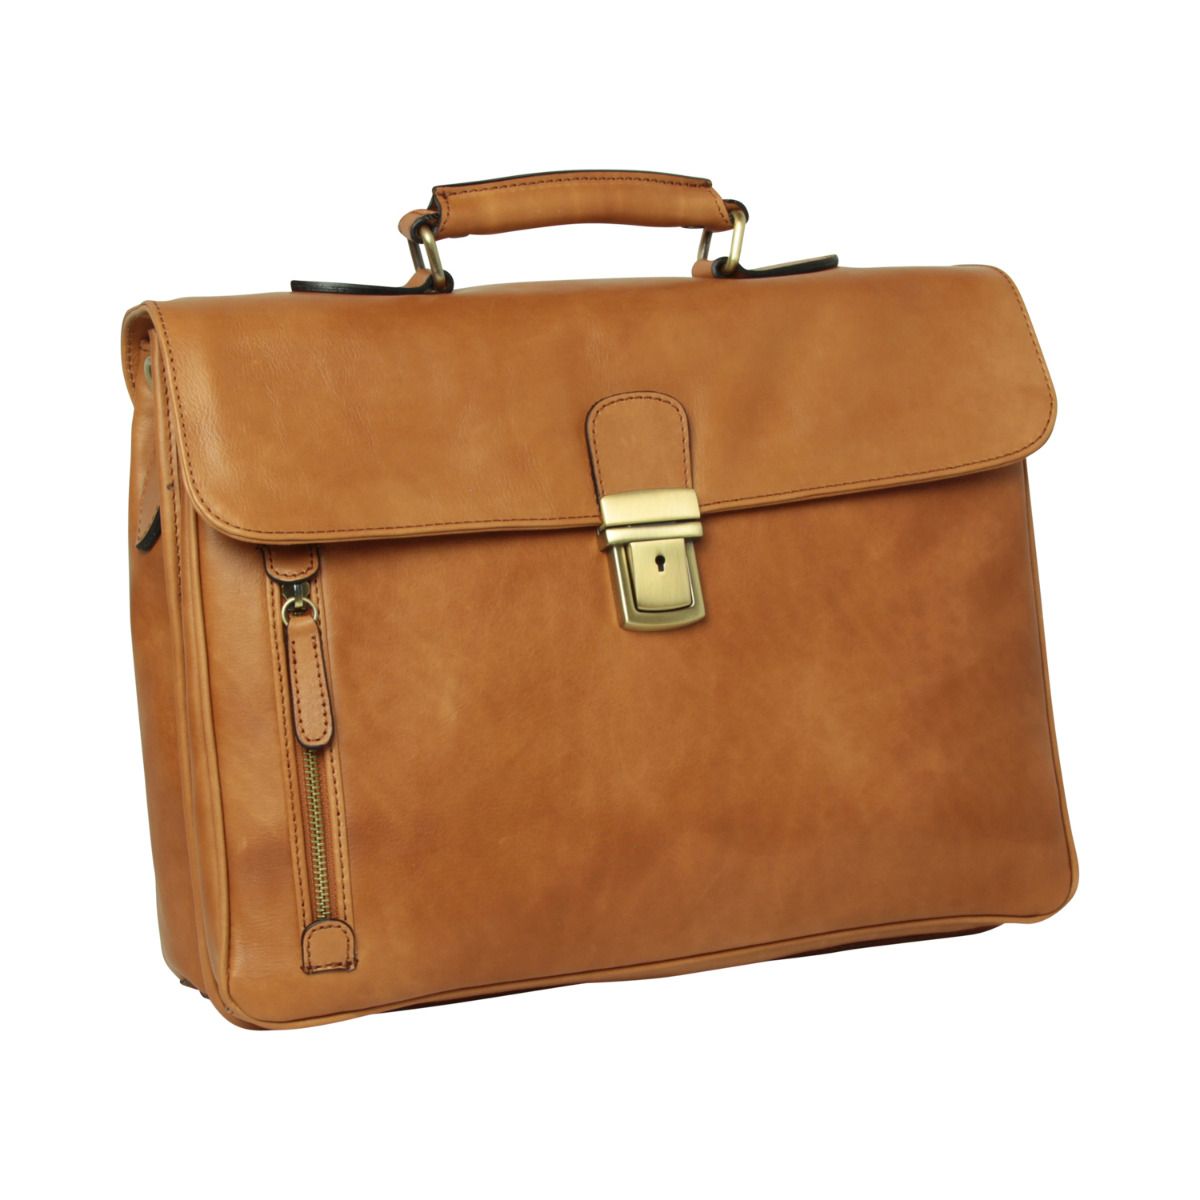 Leather Briefcase A new twist on ’professional’, this compact briefcase gives ’classic’ a sporty new look.